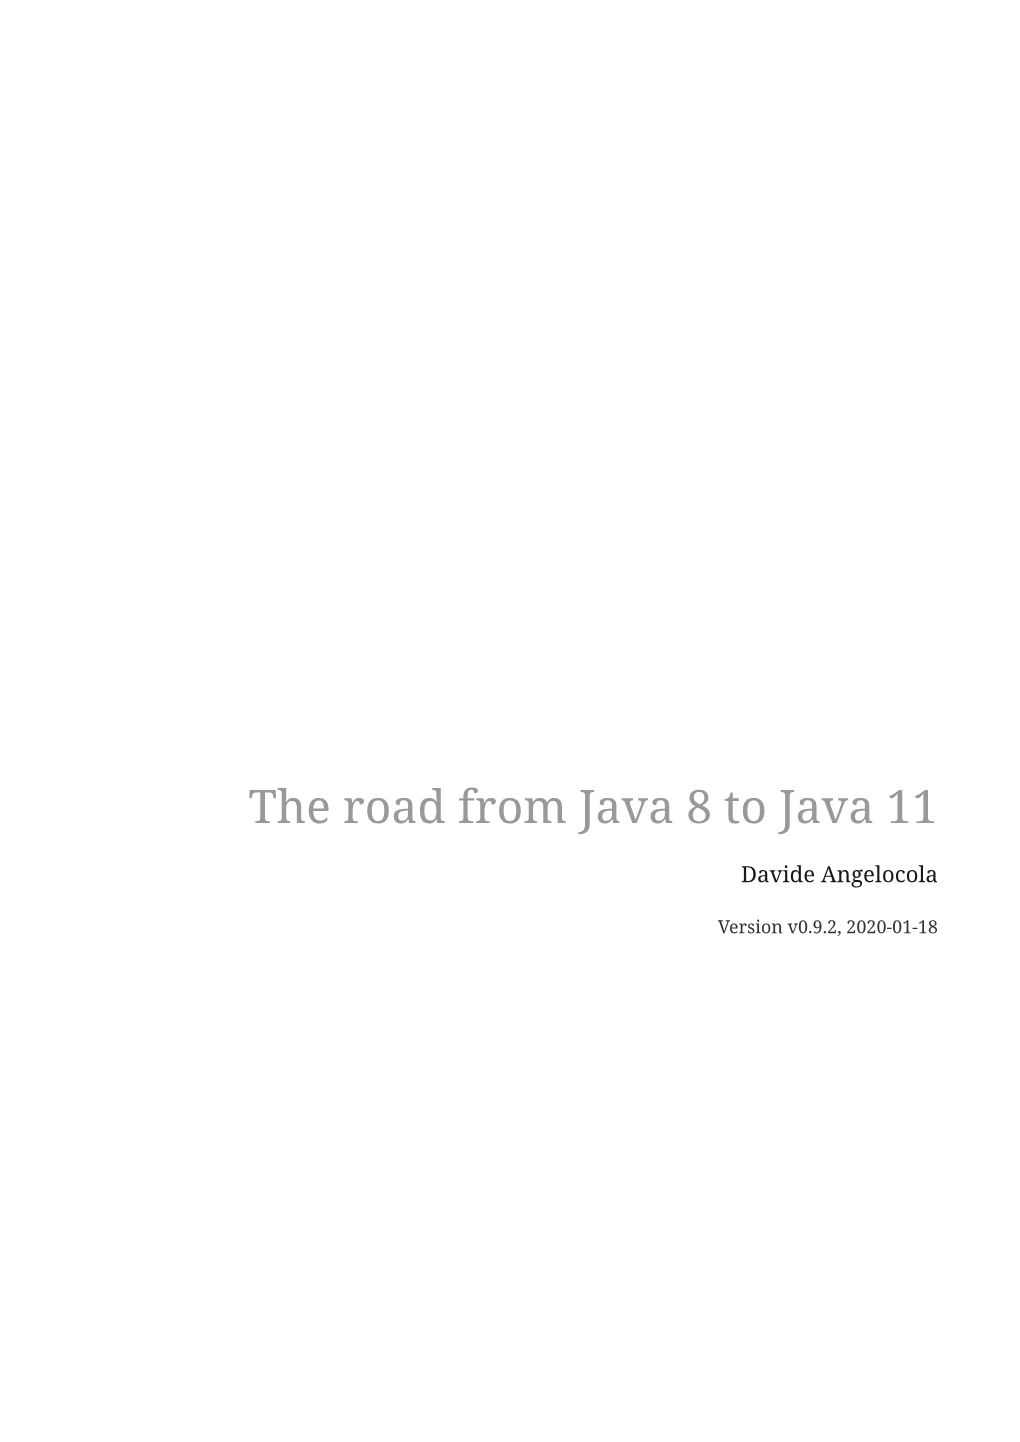 The Road from Java 8 to Java 11